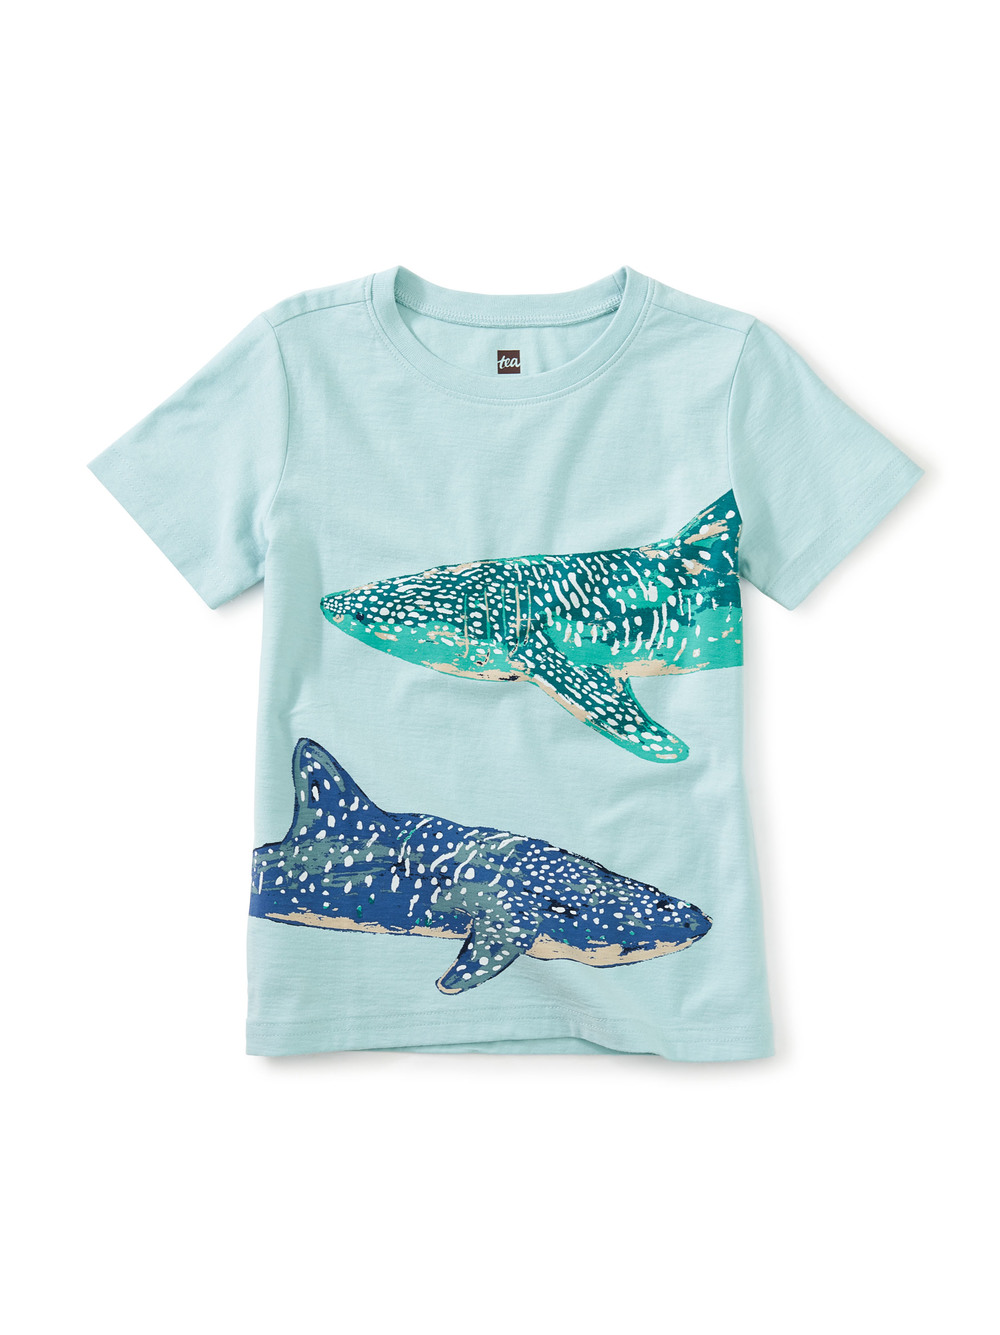 Whale Shark Double-Sided Graphic Tee | Tea Collection